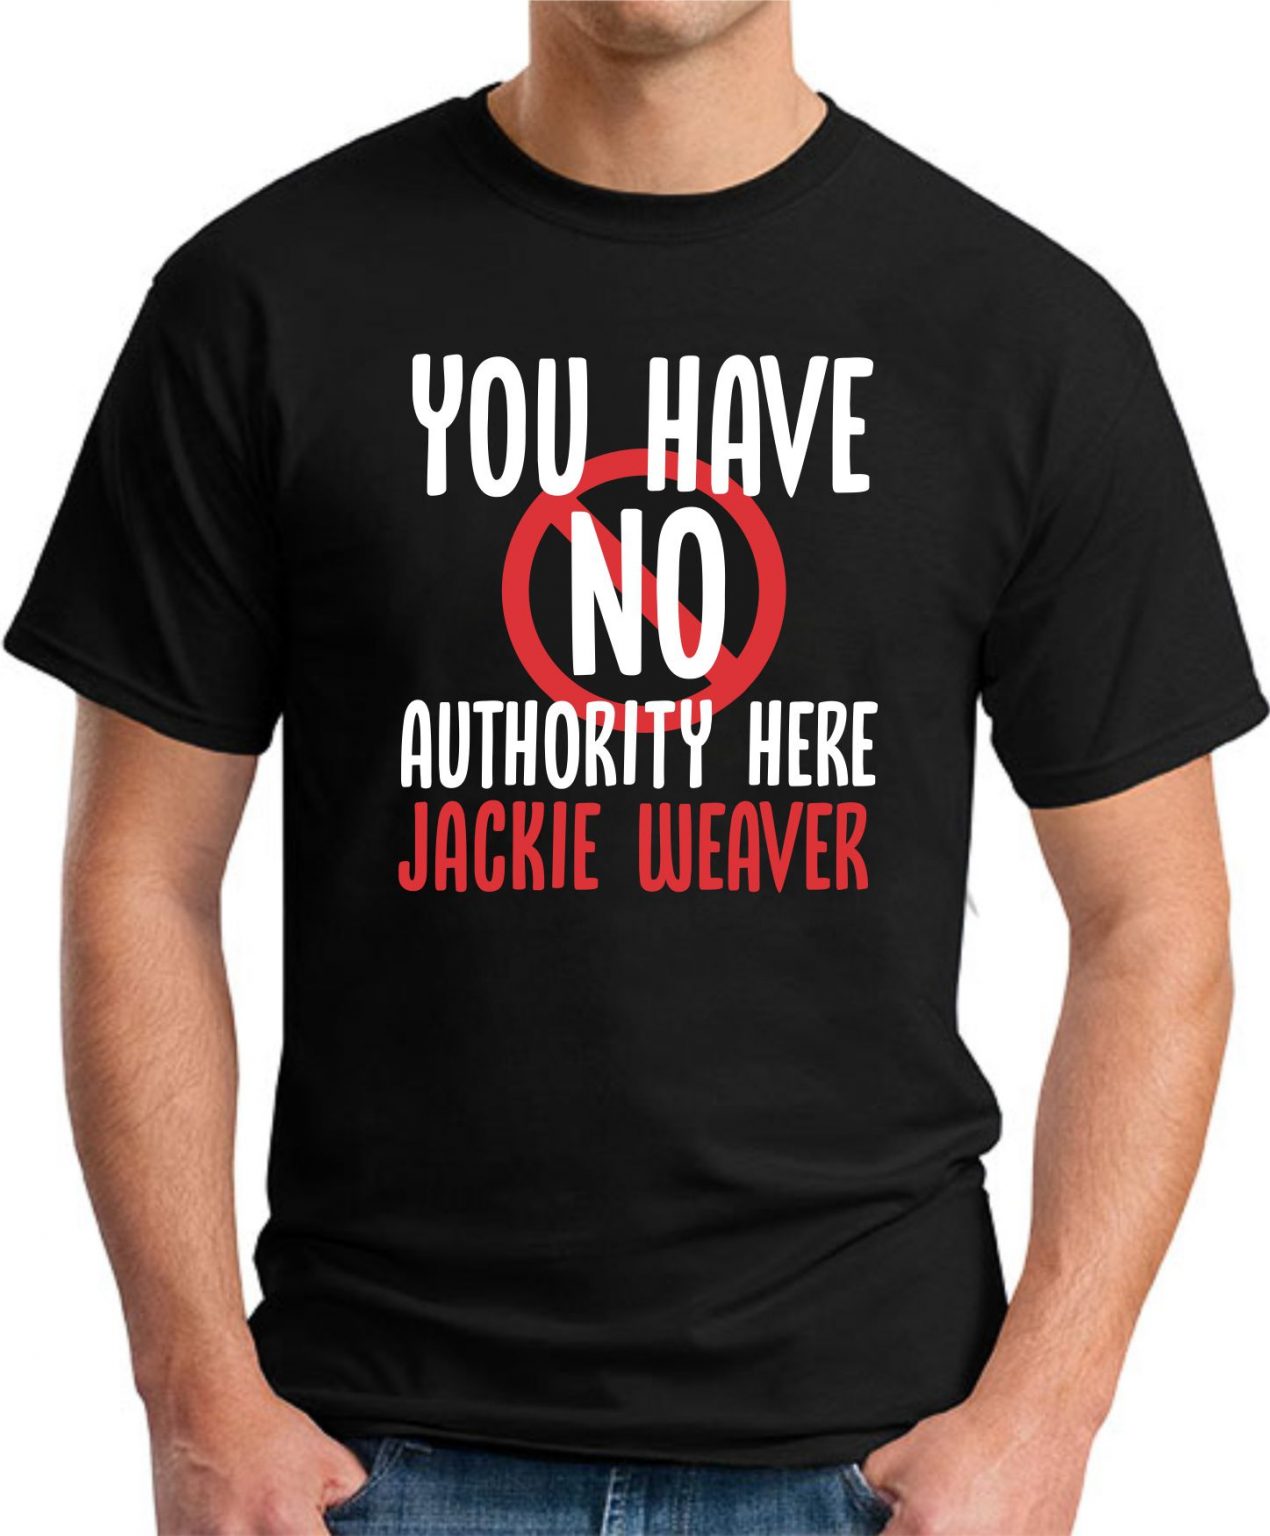 YOU HAVE NO AUTHORITY HERE JACKIE WEAVER T-SHIRT - GeekyTees